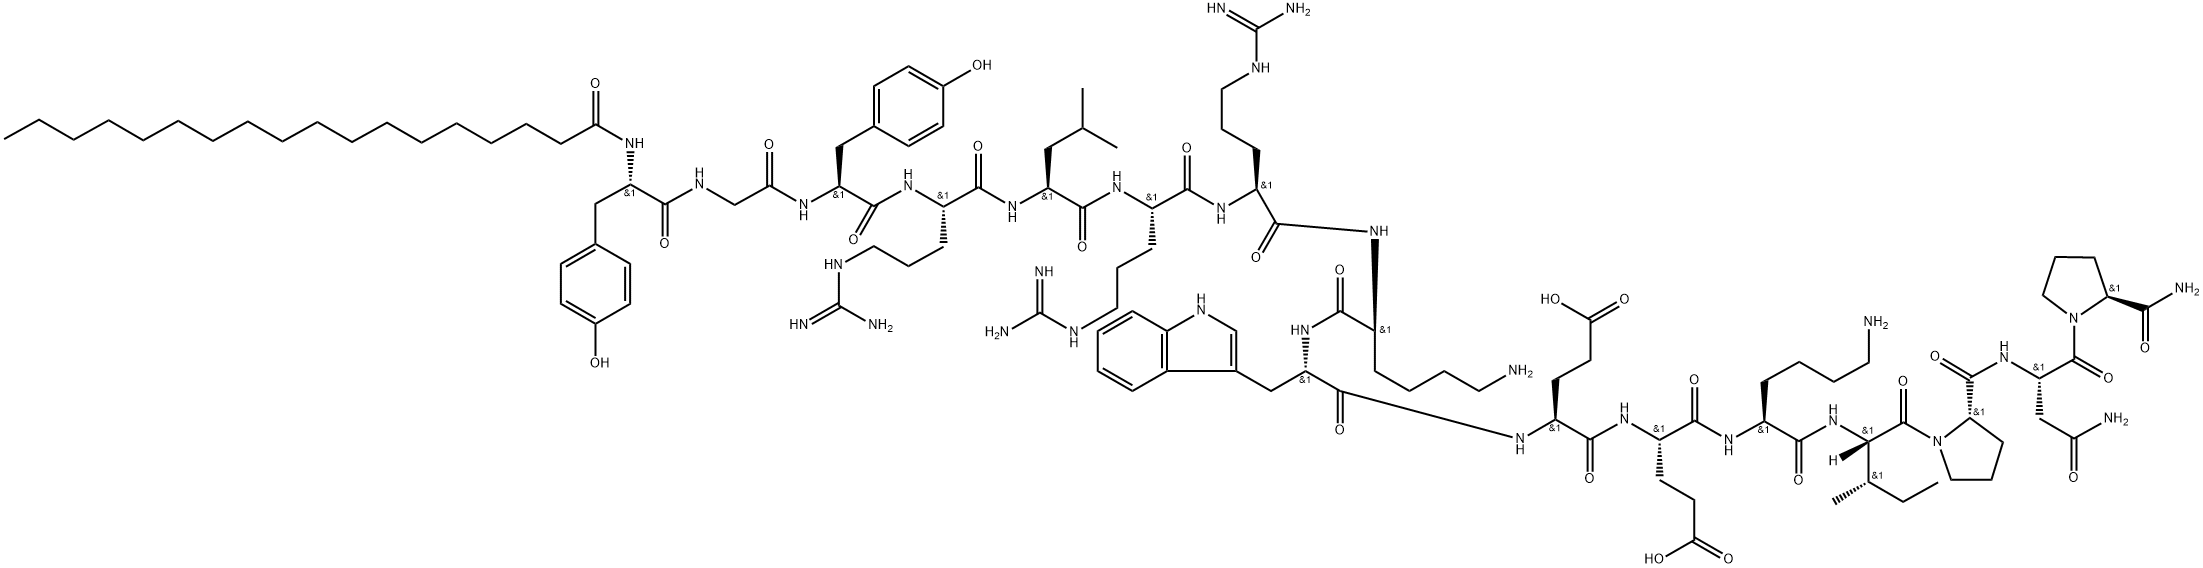 LYN PEPTIDE INHIBITOR Structure